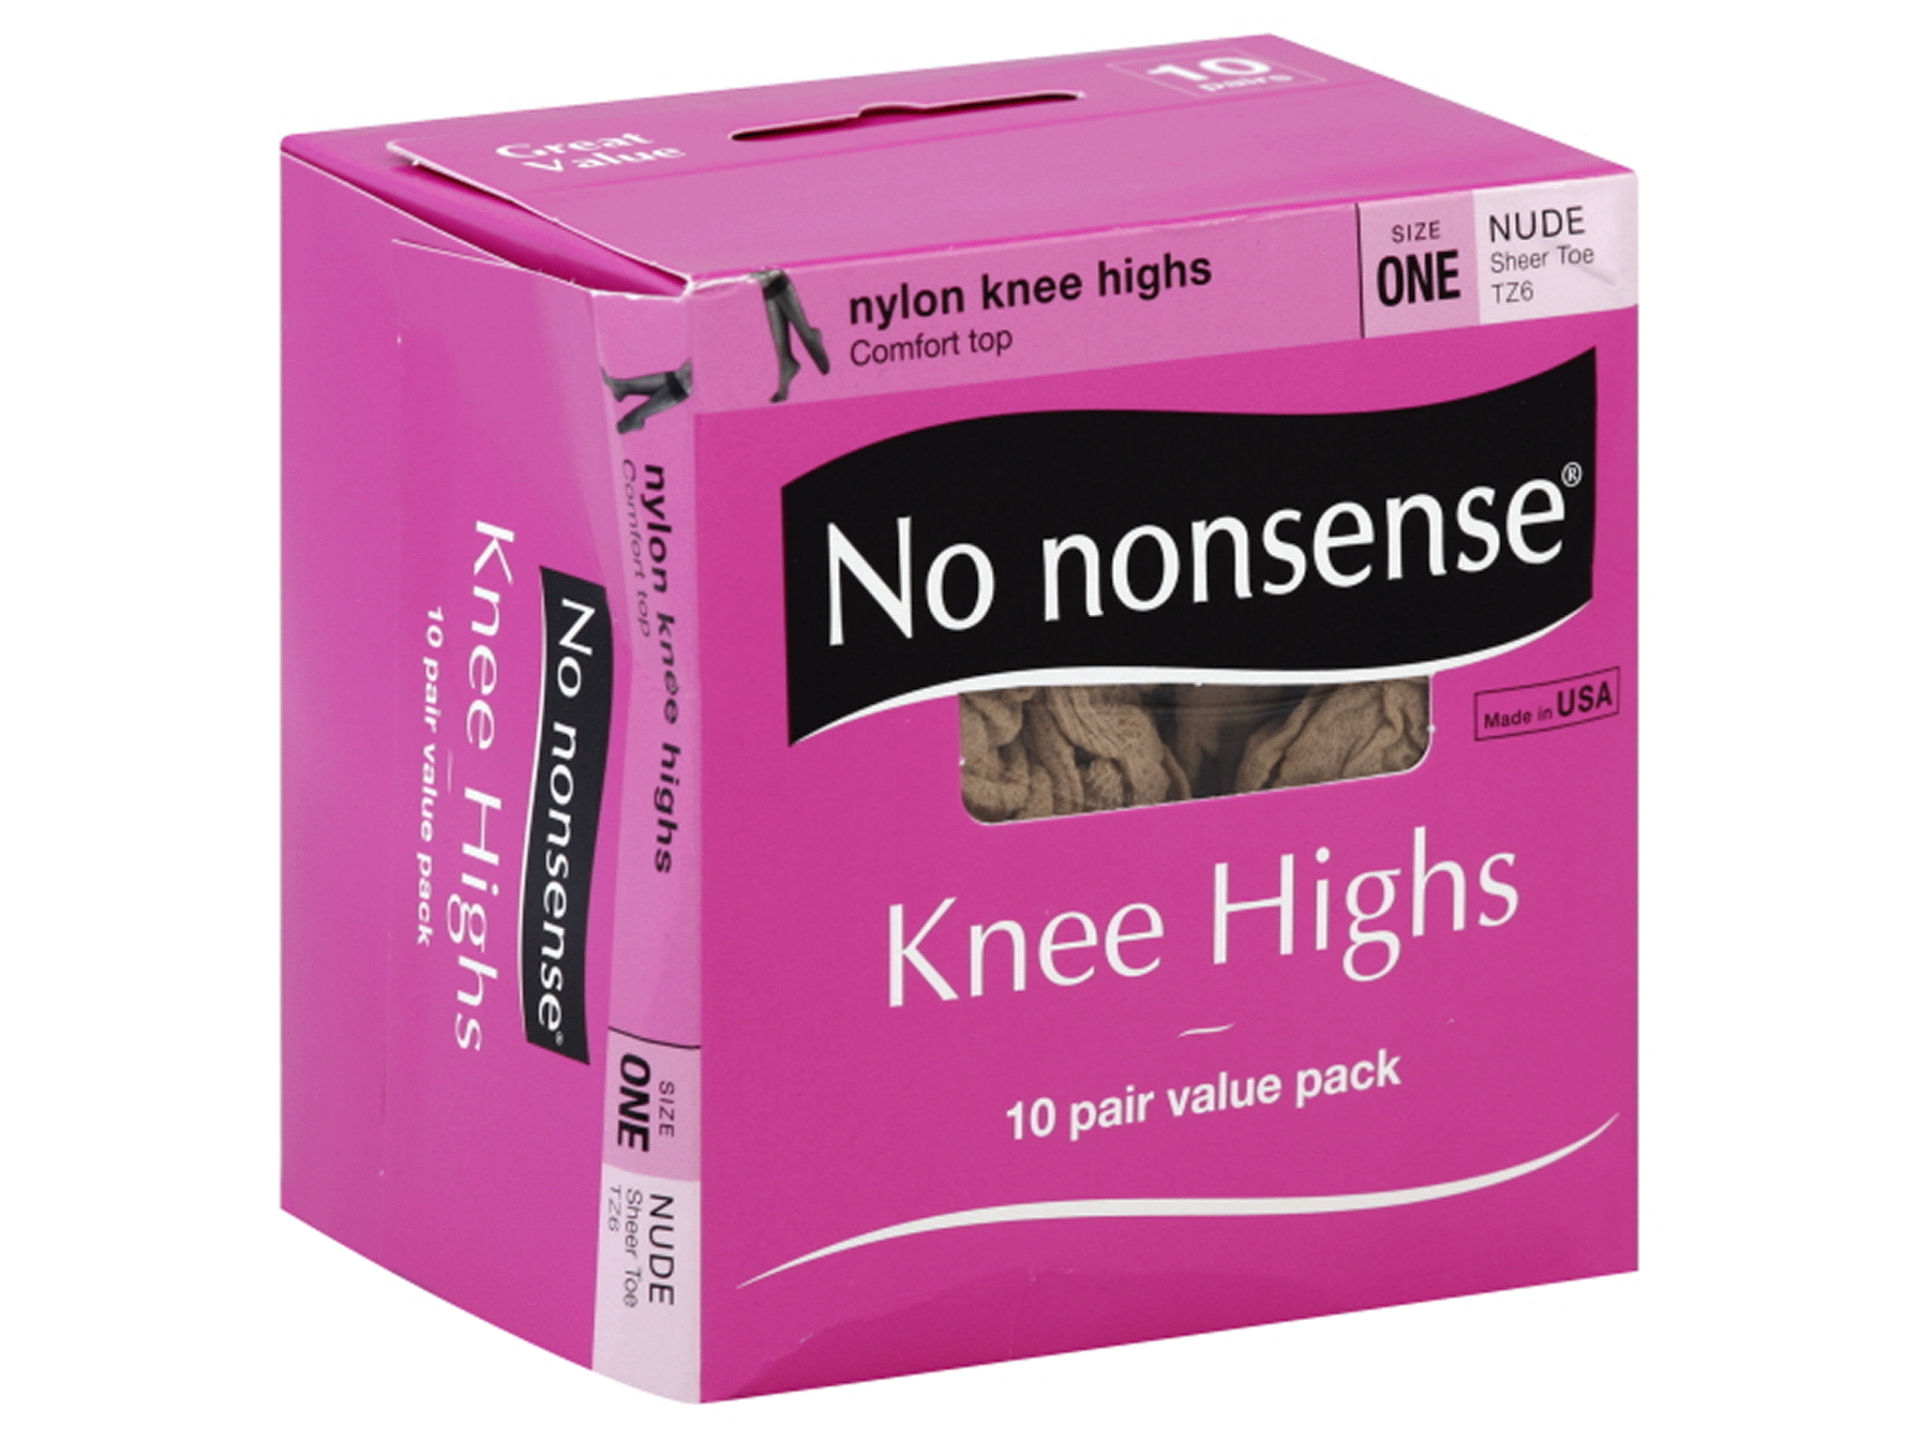 slide 1 of 4, No Nonsense Nylon Knee Highs, Size One, Nude, 10 ct